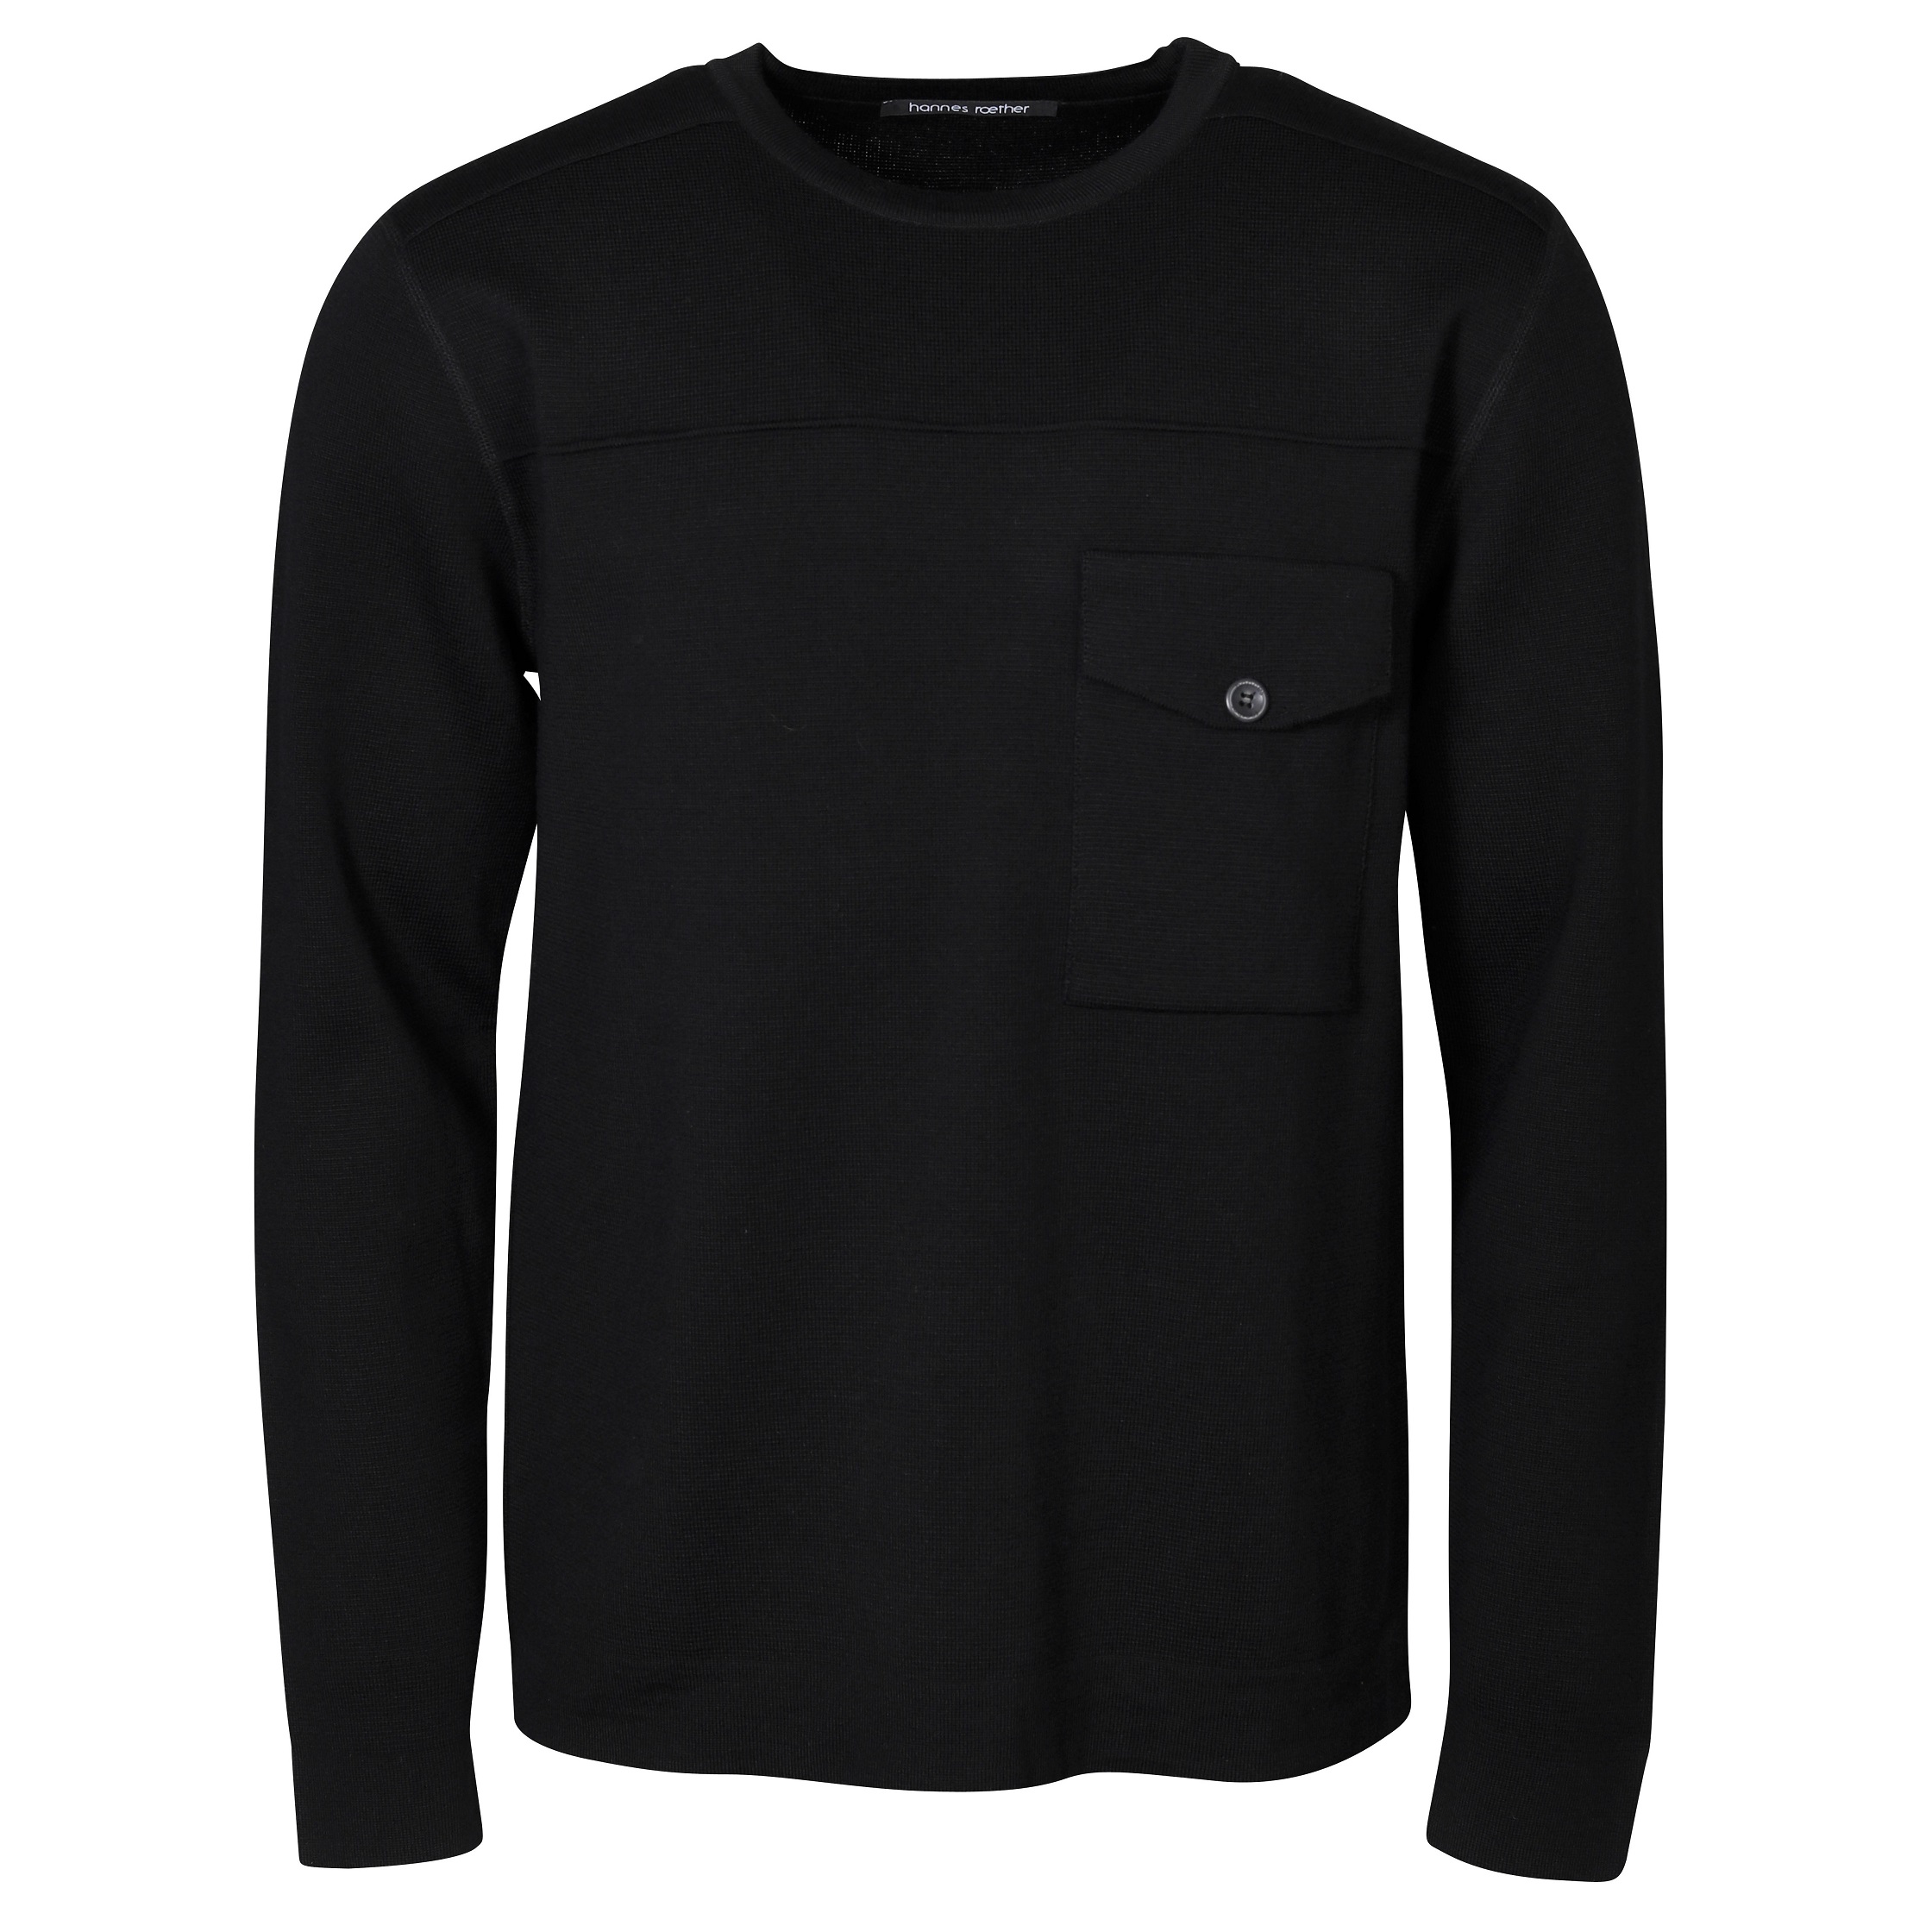 Hannes Roether Knit Pullover in Black